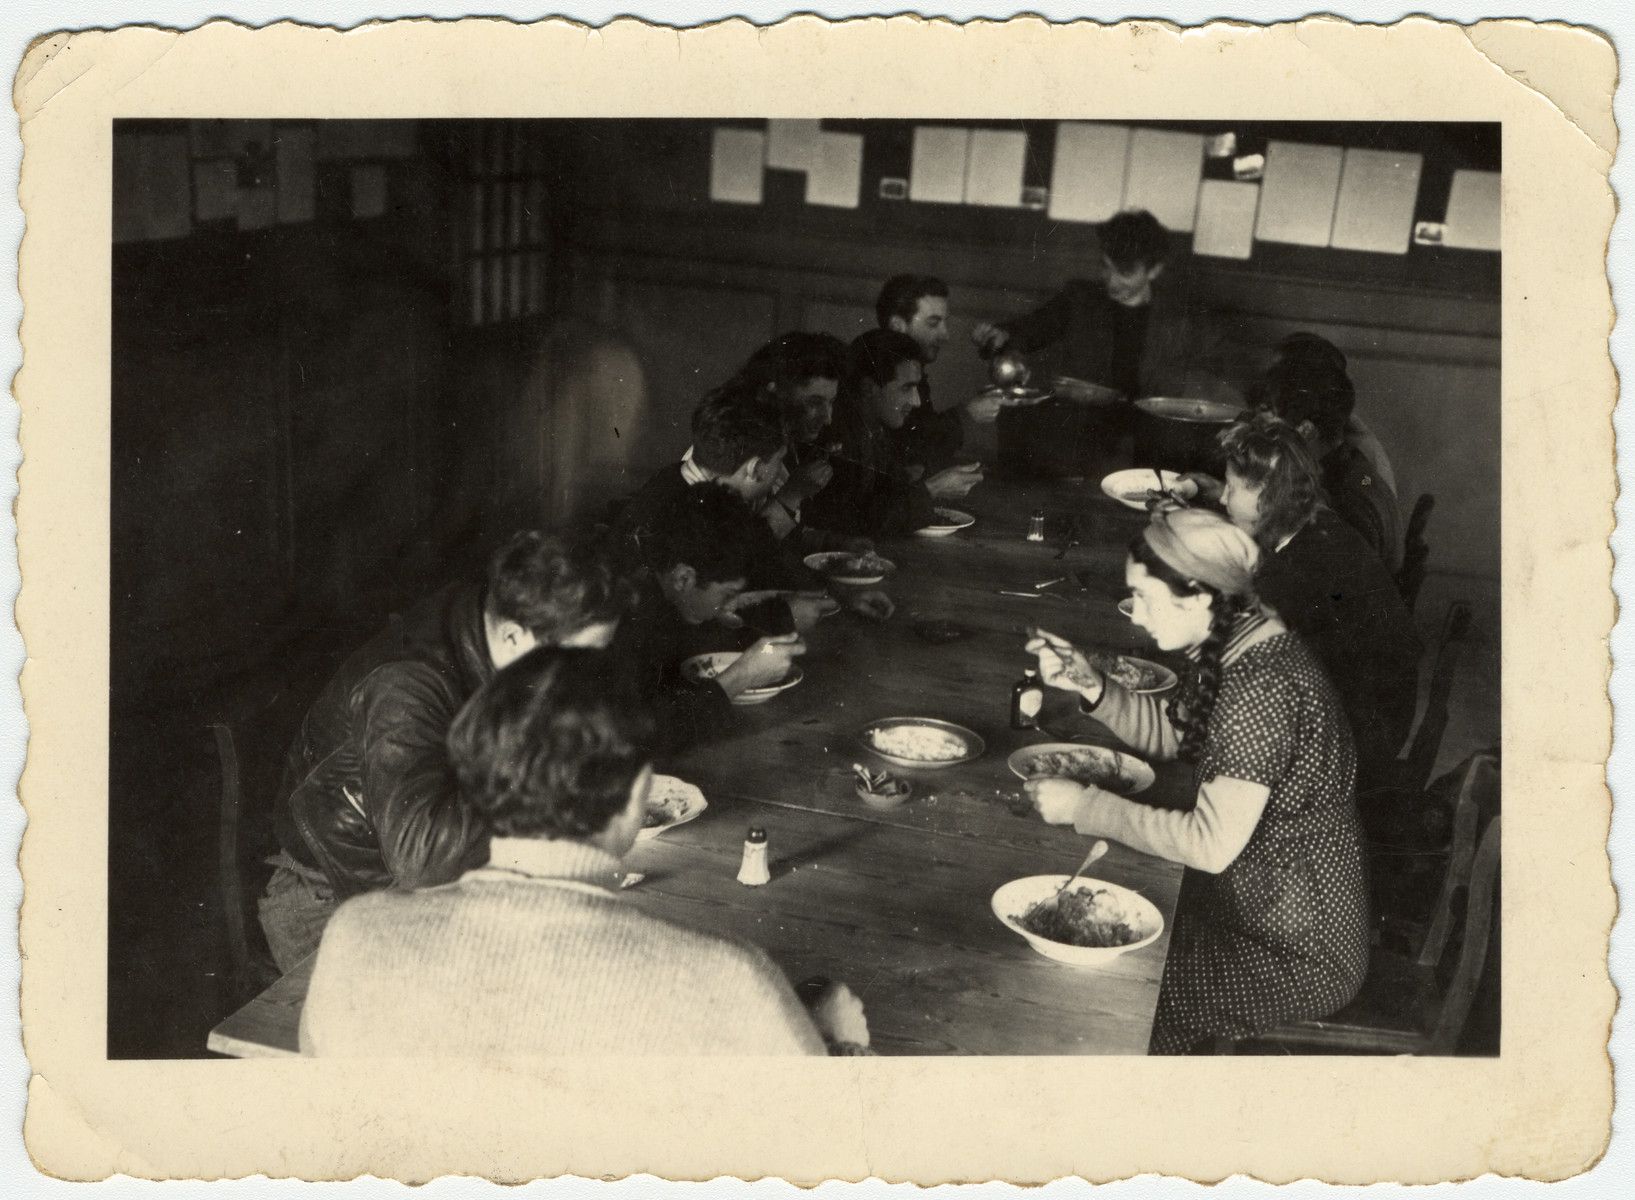 Jewish youth eat in the dining room of the La Ramee agricultural school in Belgium.

The school was established after Jewish students were expelled from general schools  and directed by Haroun Tazieff.